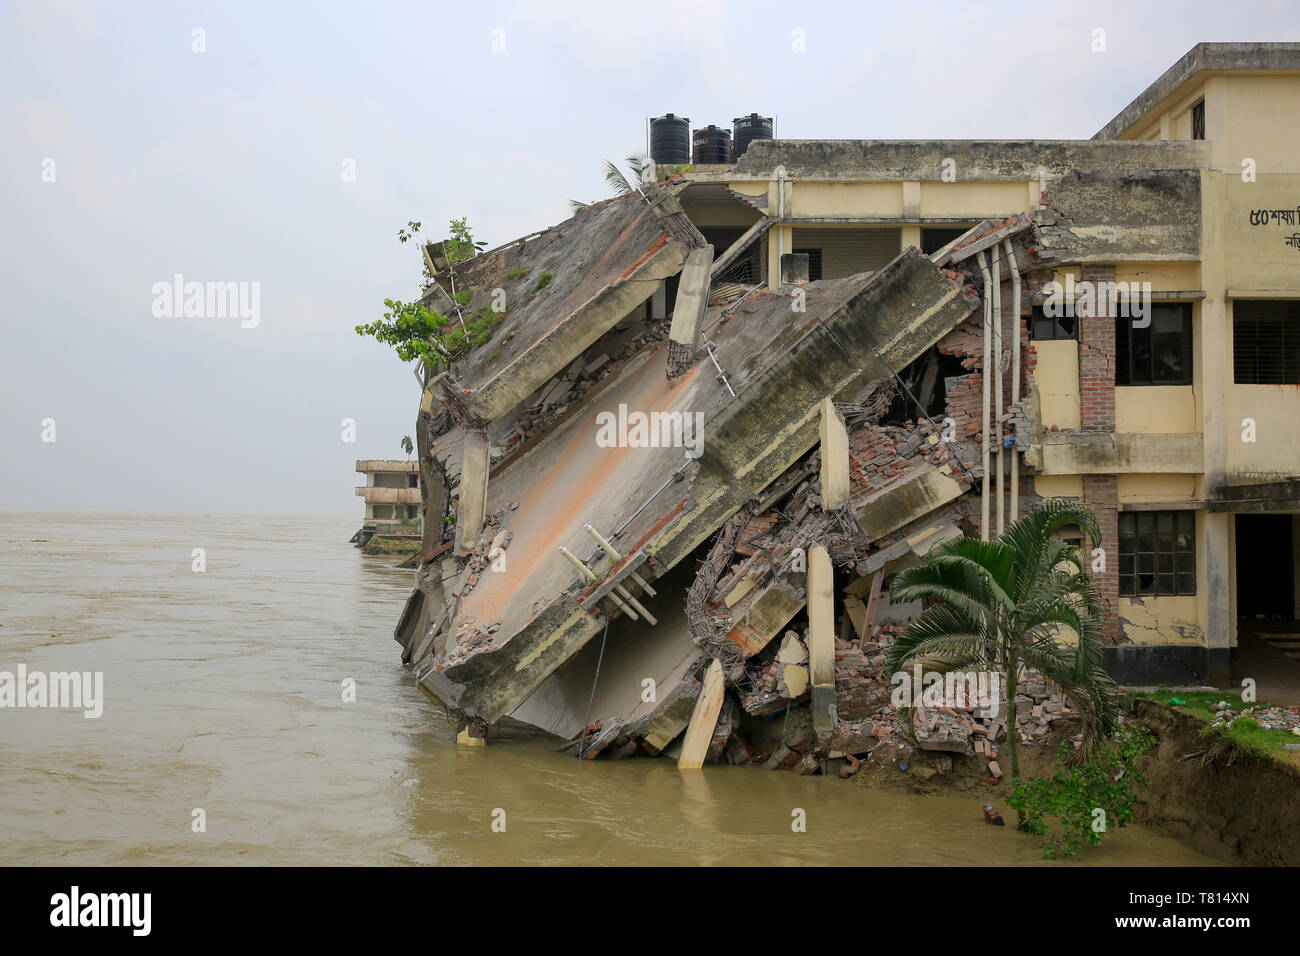 Naria Upazila Health Complex building in Shariatpur district goes into the Padma River. Shariatpur, Bangladesh Stock Photo